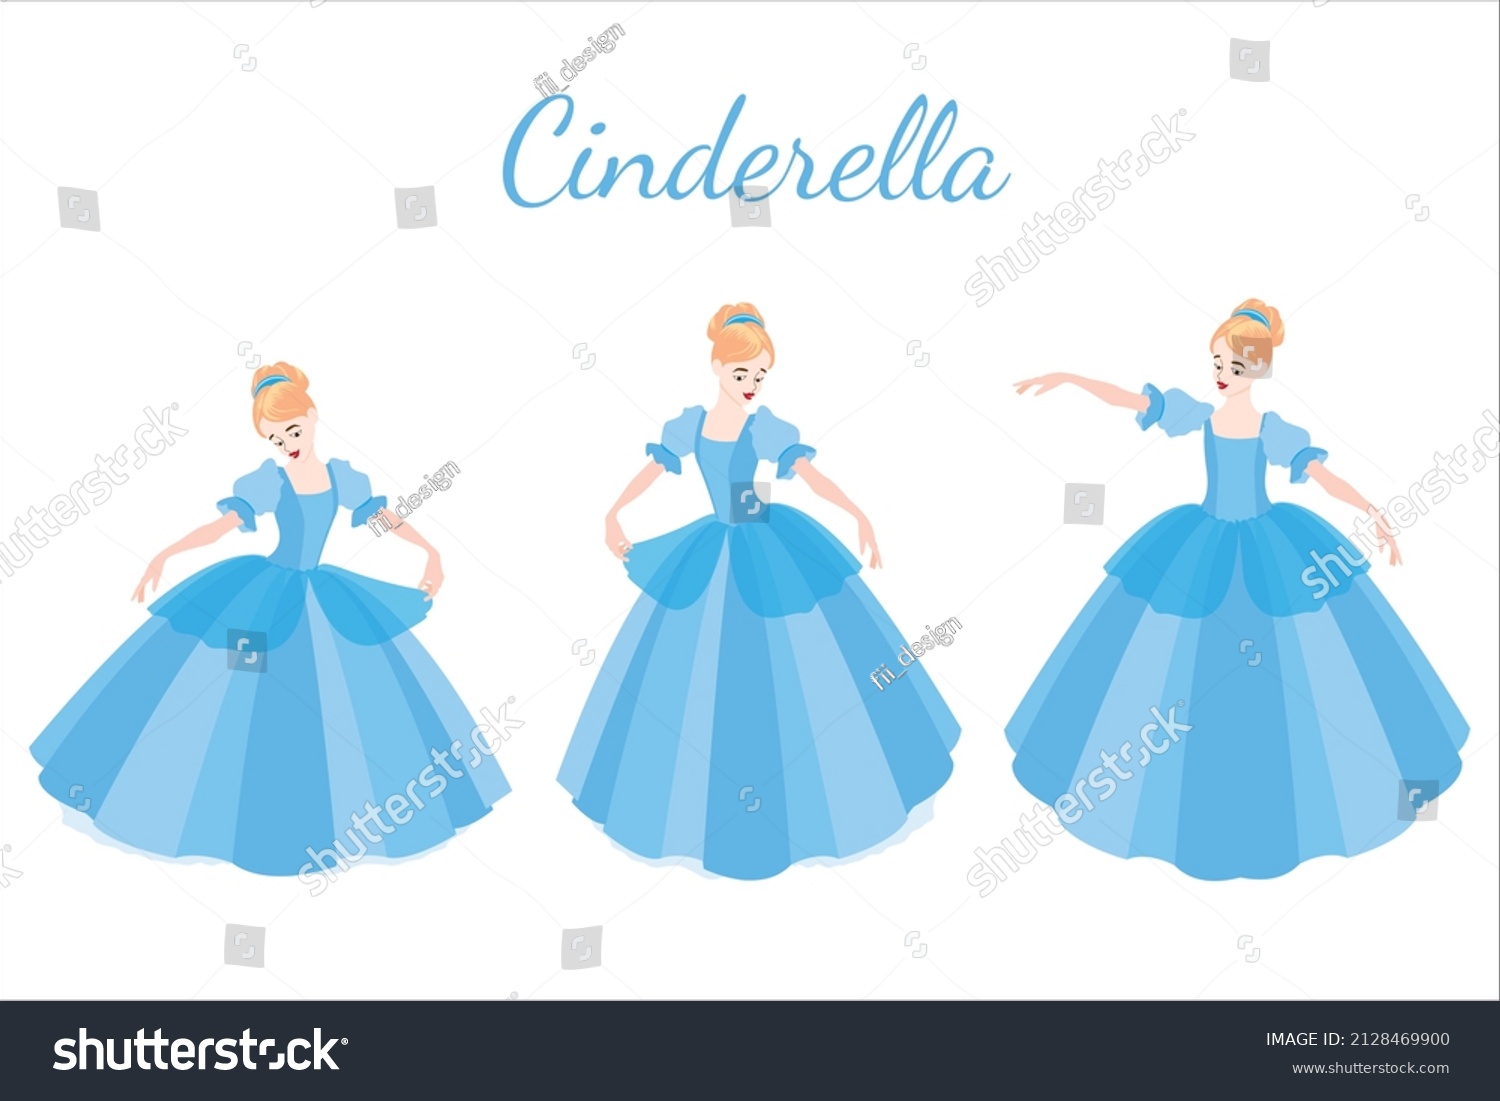 SVG of cinderella vector illustration design suitable for fairy tale cartoon character princess children's book fairy tale day svg